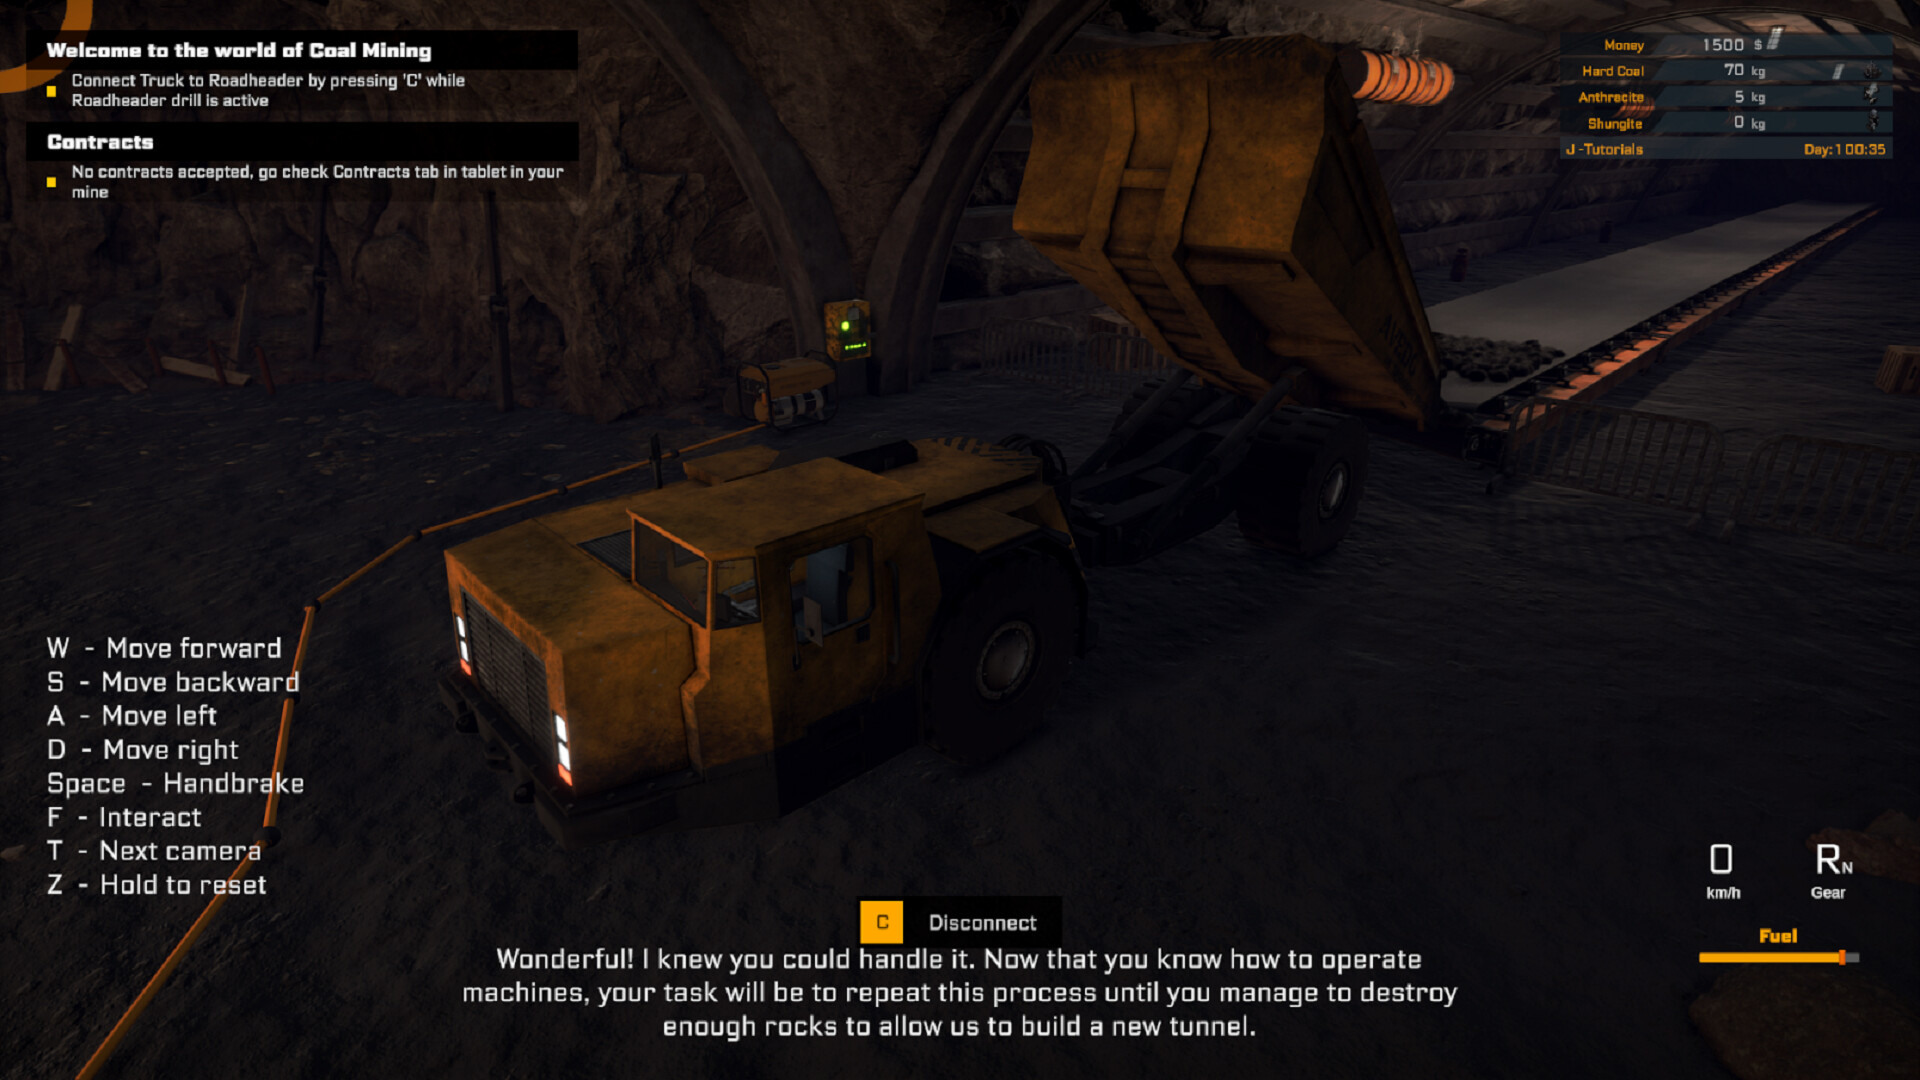 Find the best laptops for Coal Mining Simulator